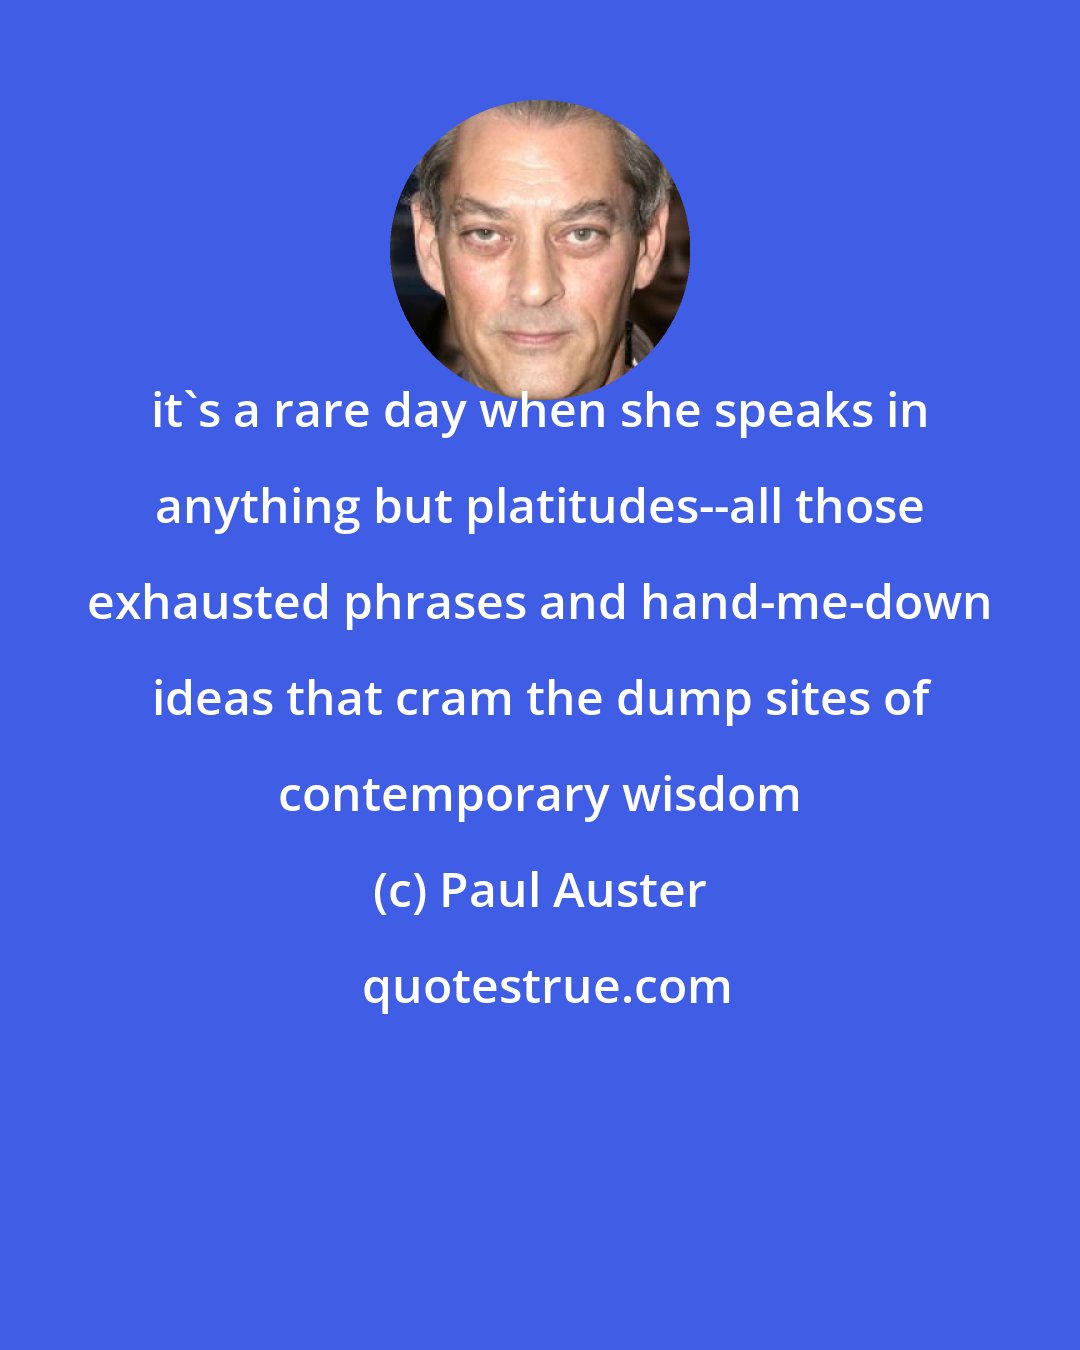 Paul Auster: it's a rare day when she speaks in anything but platitudes--all those exhausted phrases and hand-me-down ideas that cram the dump sites of contemporary wisdom